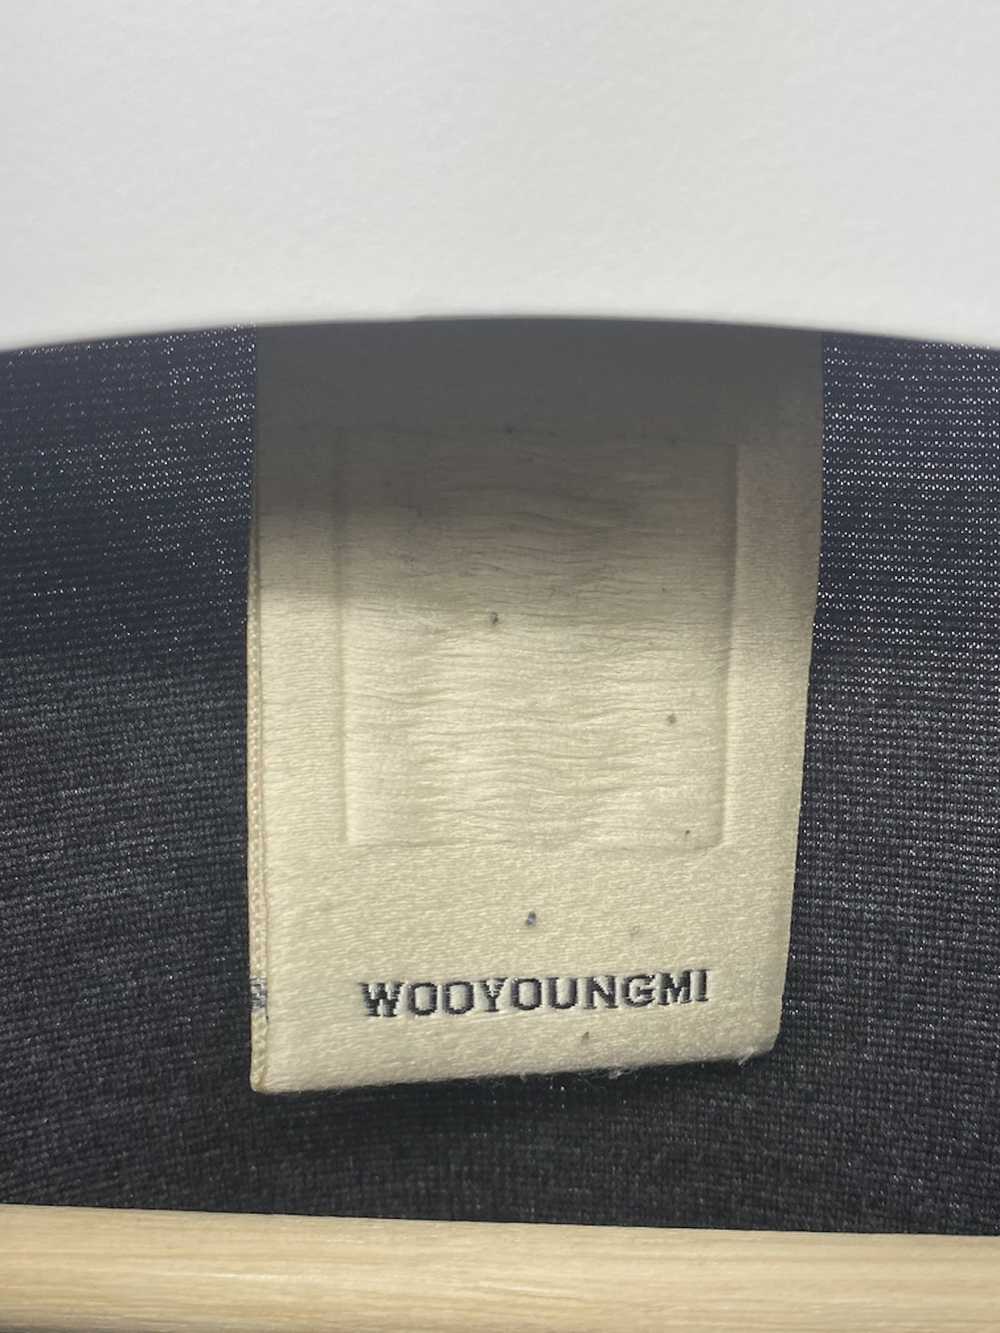 Wooyoungmi Lounge Leisure Track Suit size 56 - image 3